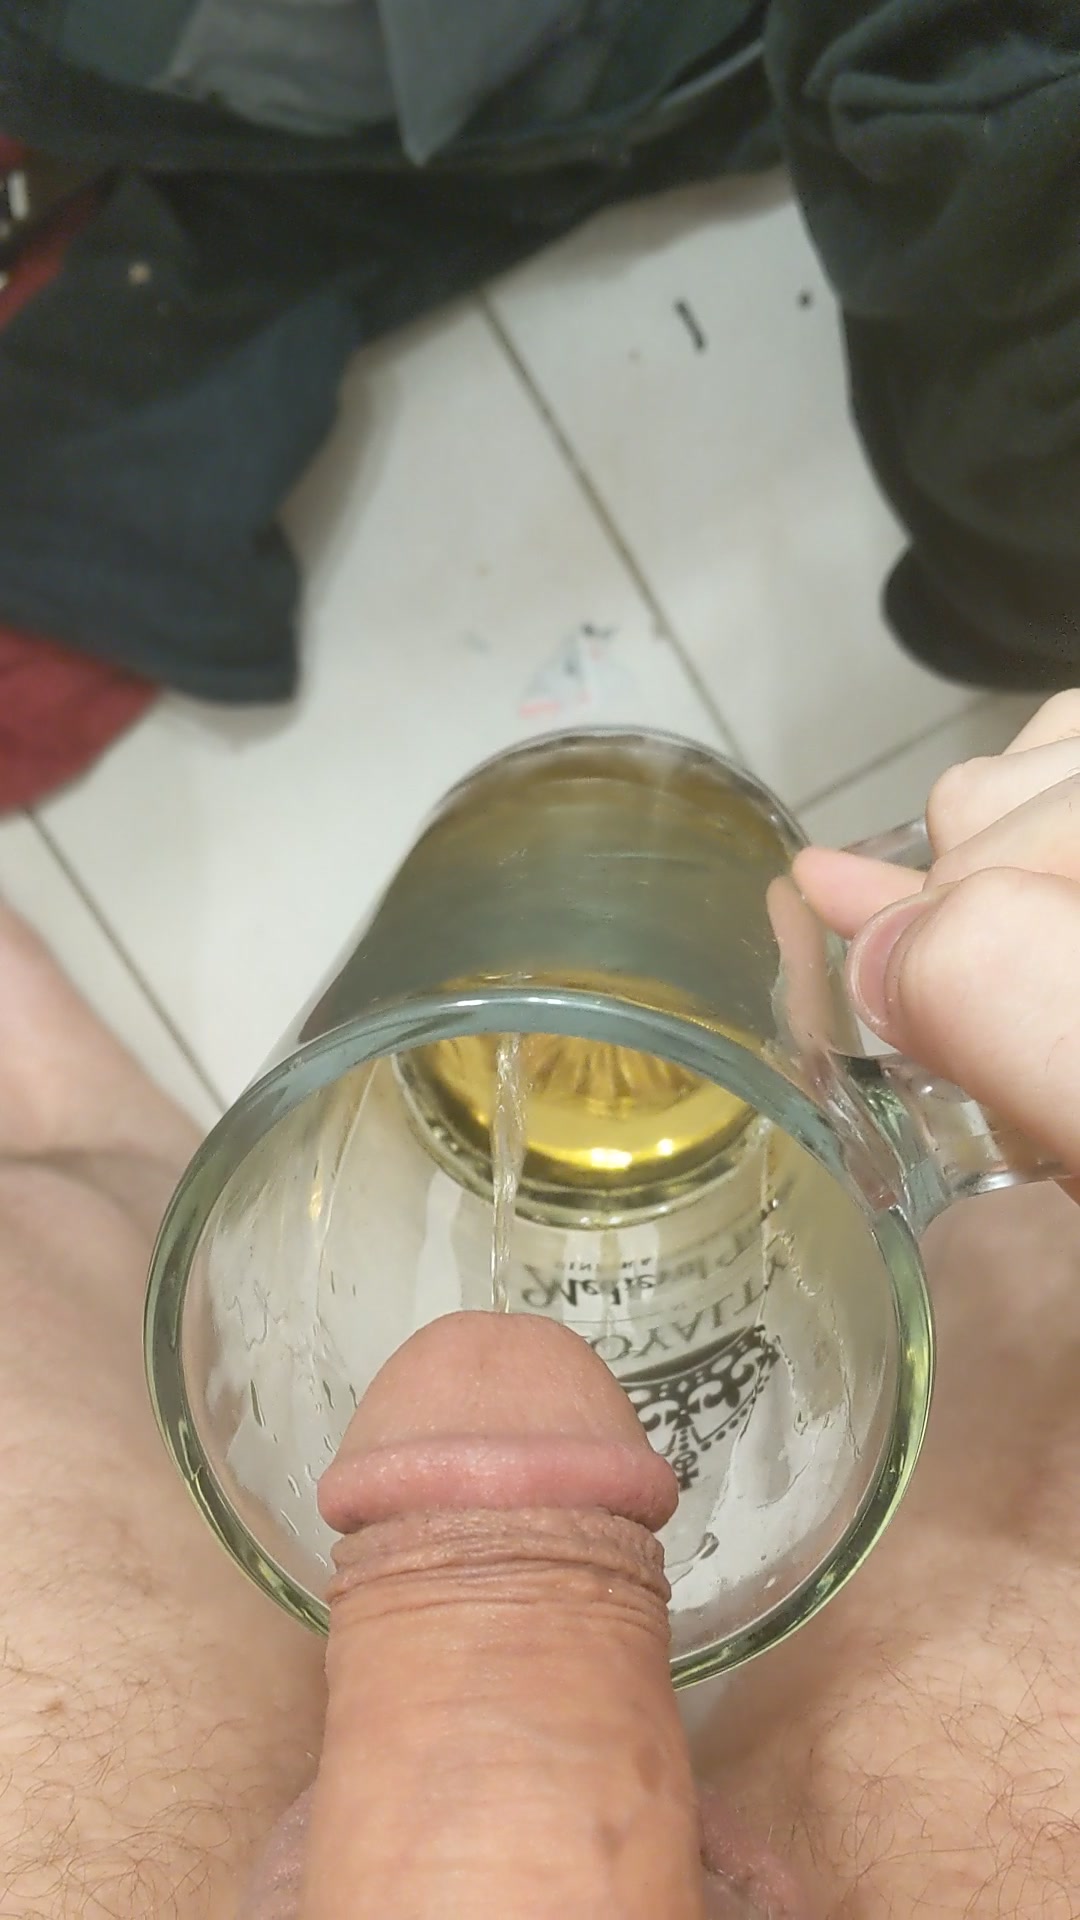 Big Dick Pig Drinking His Own Piss